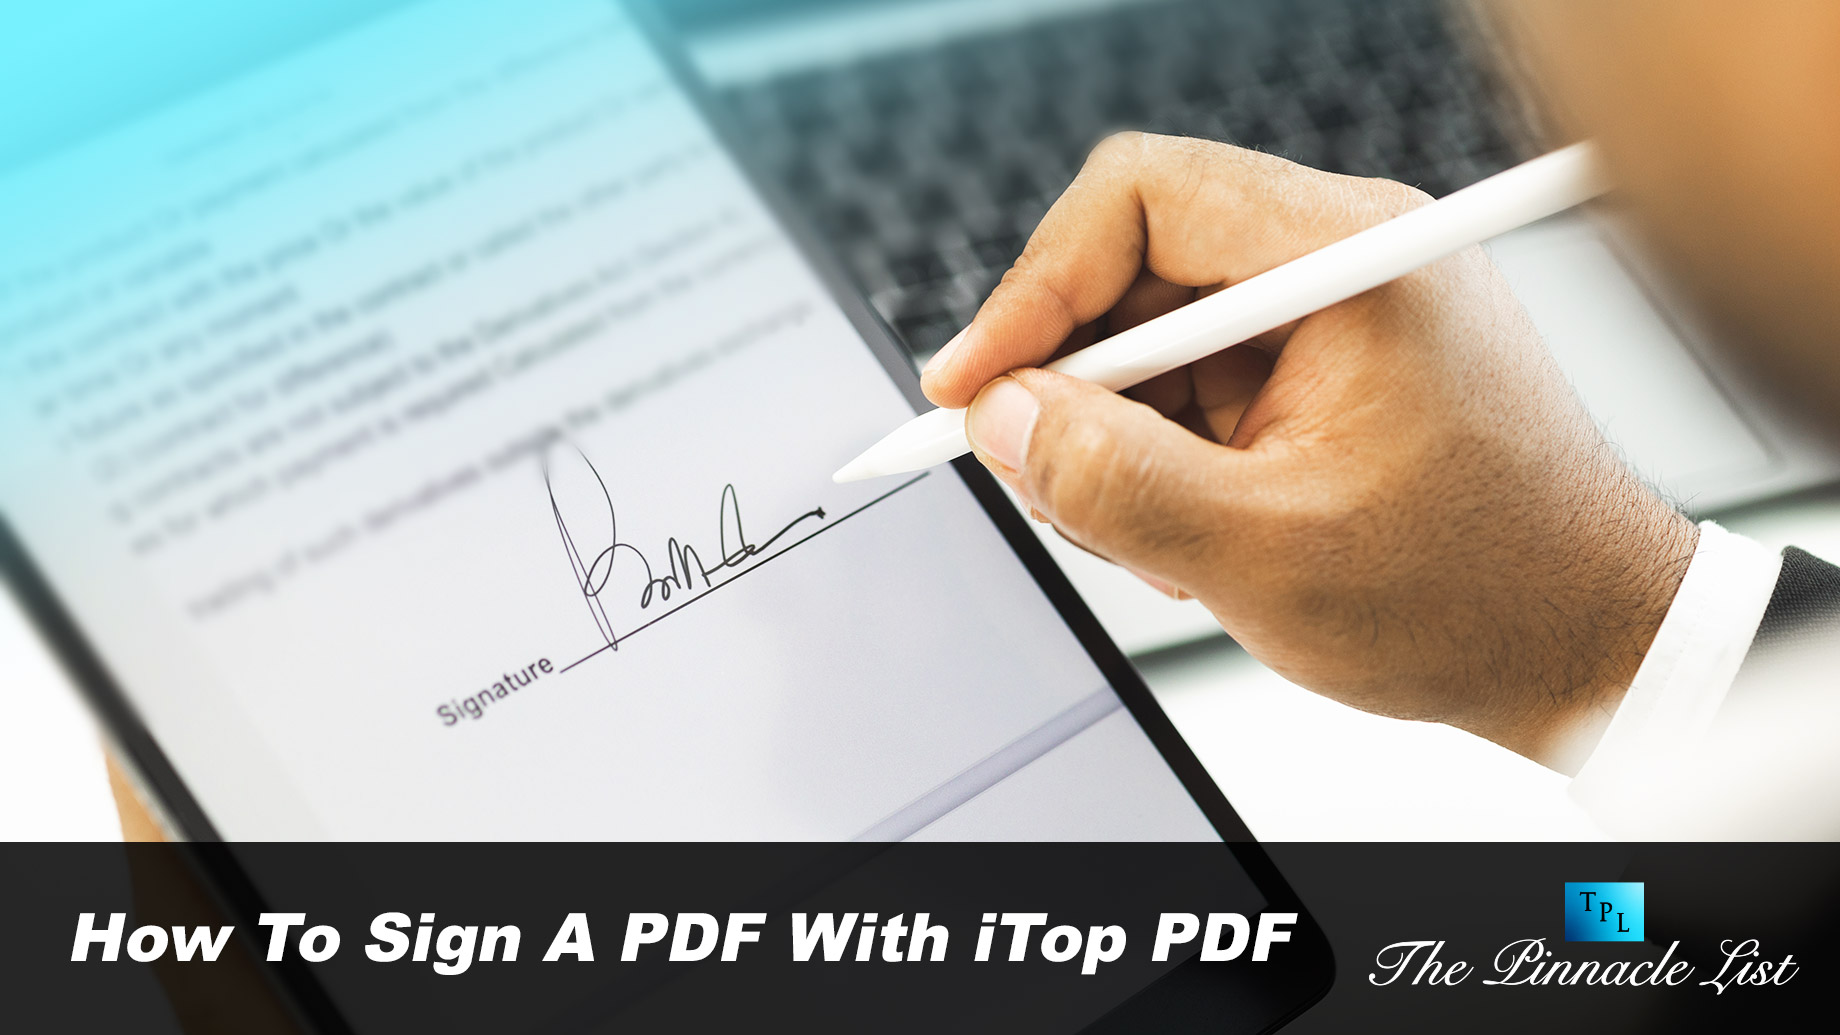 How To Sign A PDF With iTop PDF